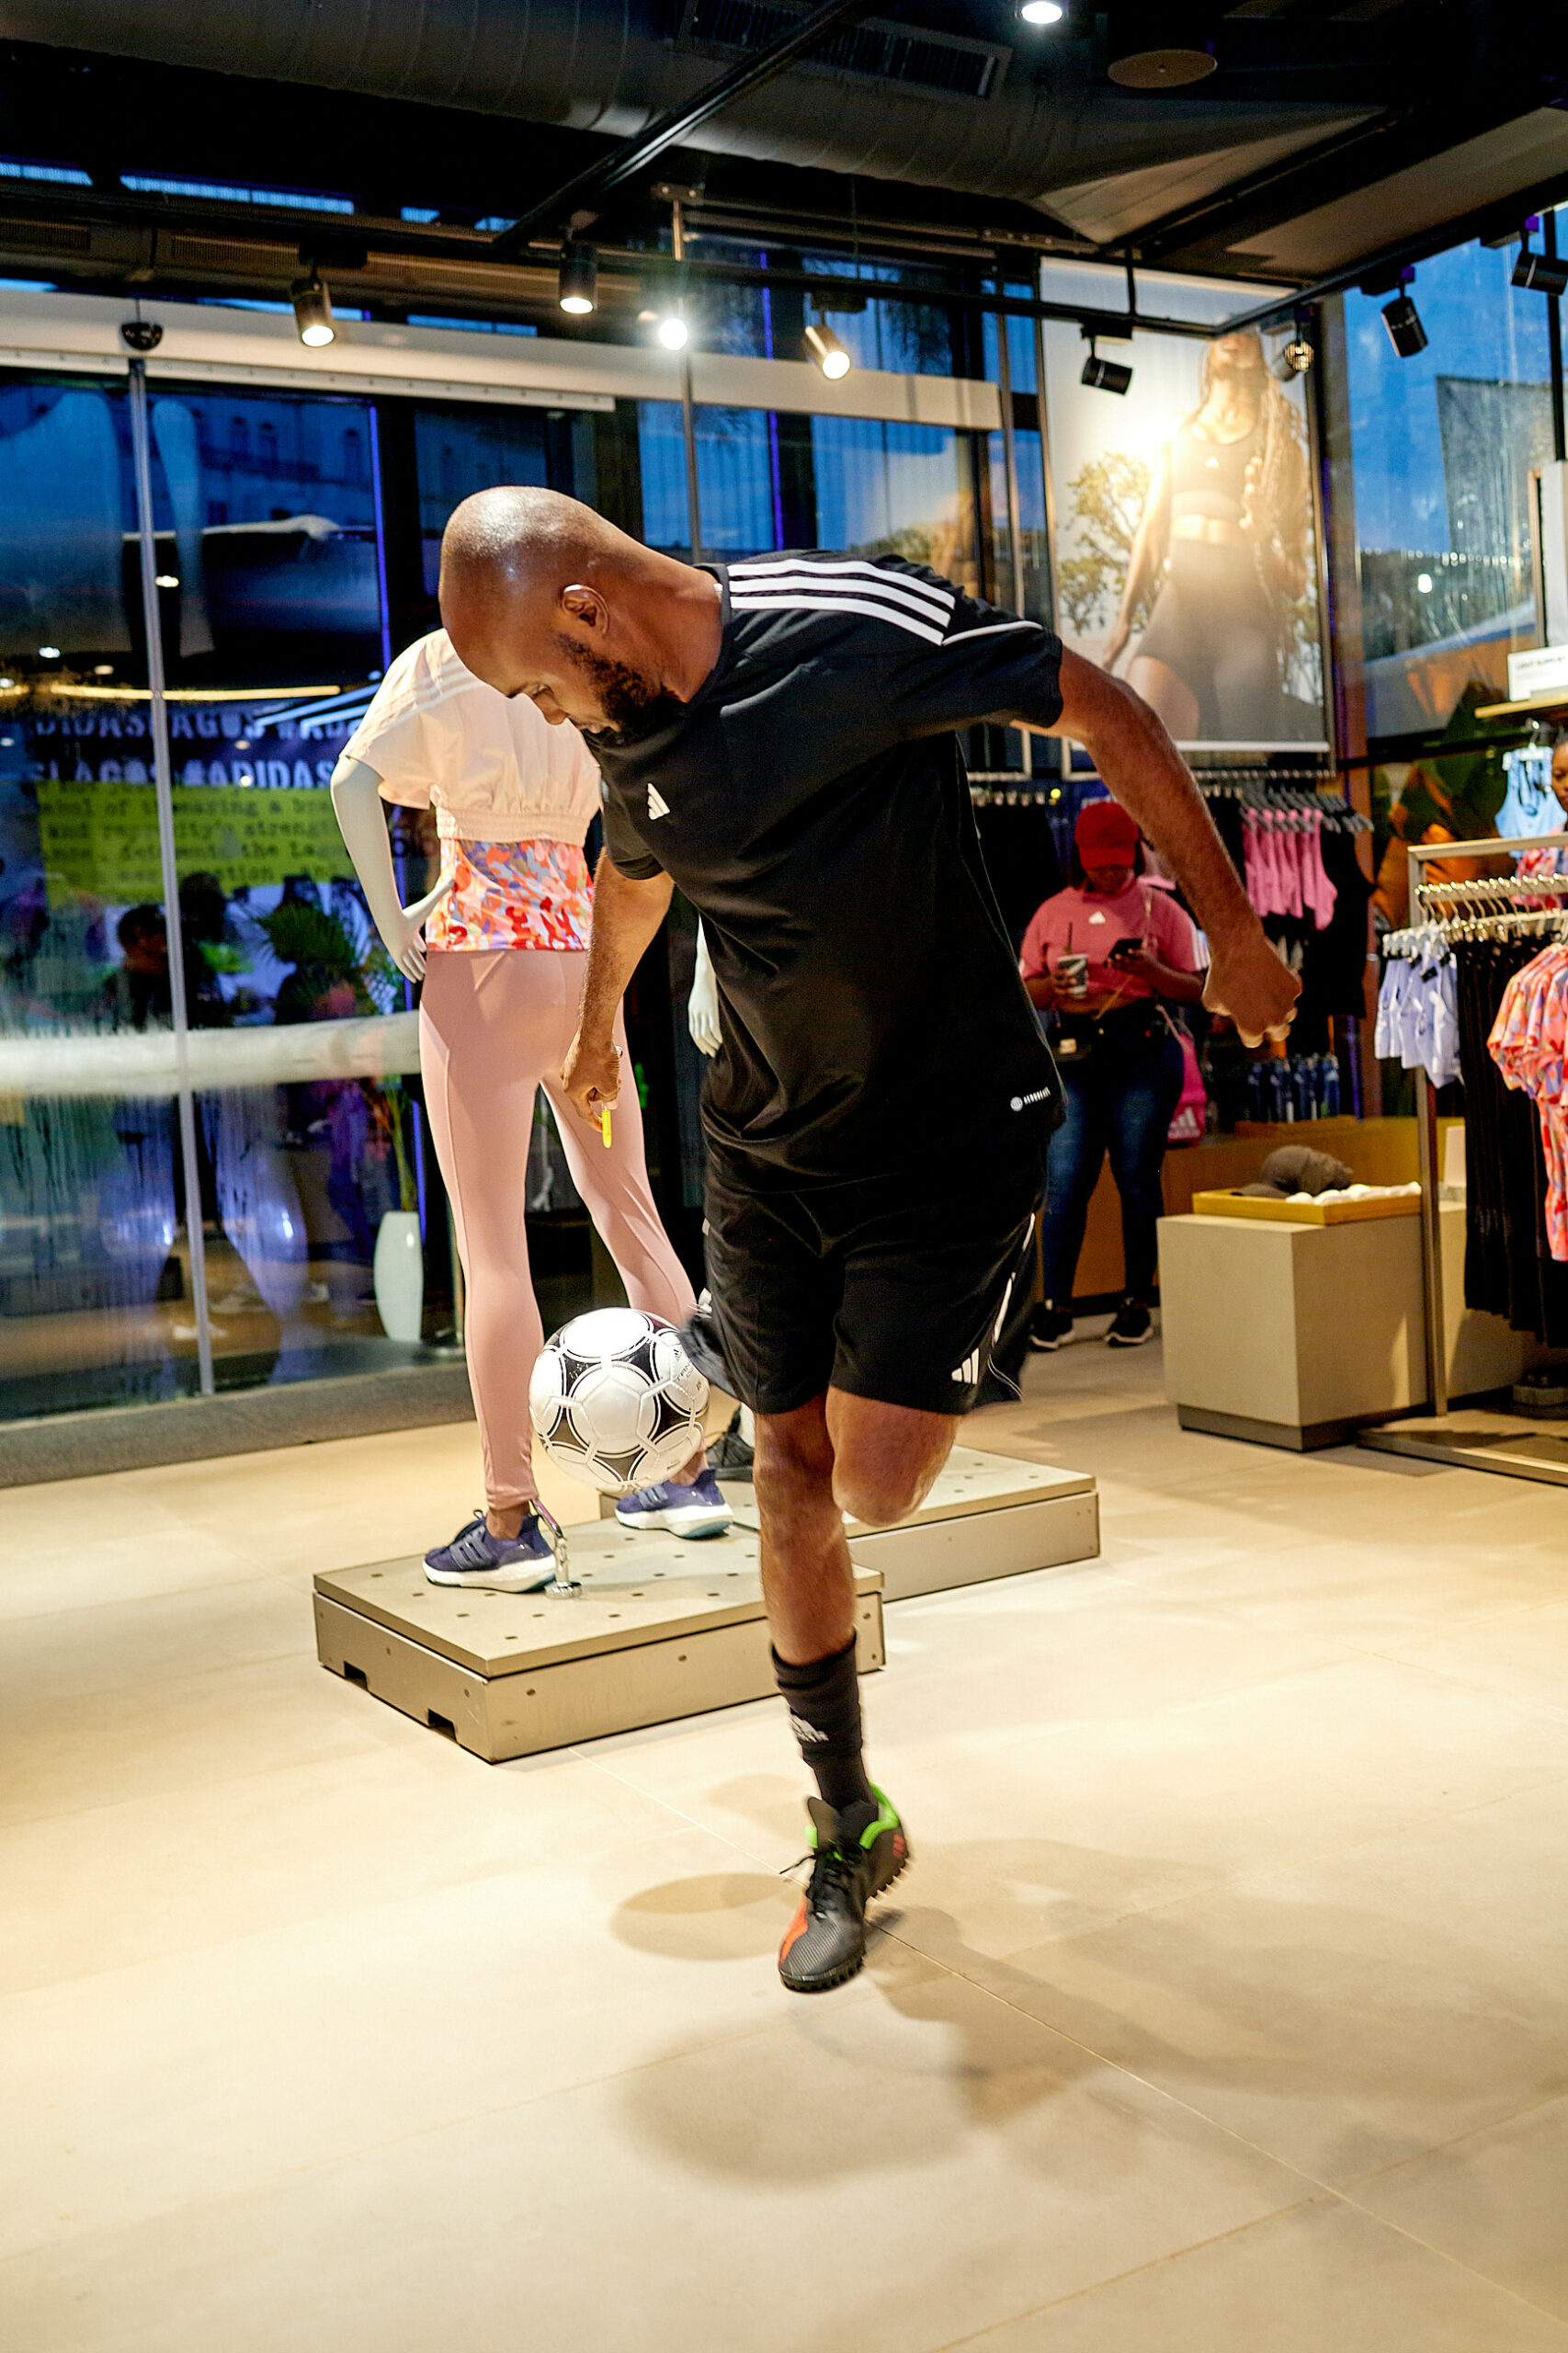 ADIDAS Opens First Flagship Store In Lagos, Offering a New Shopping  Experience | BellaNaija